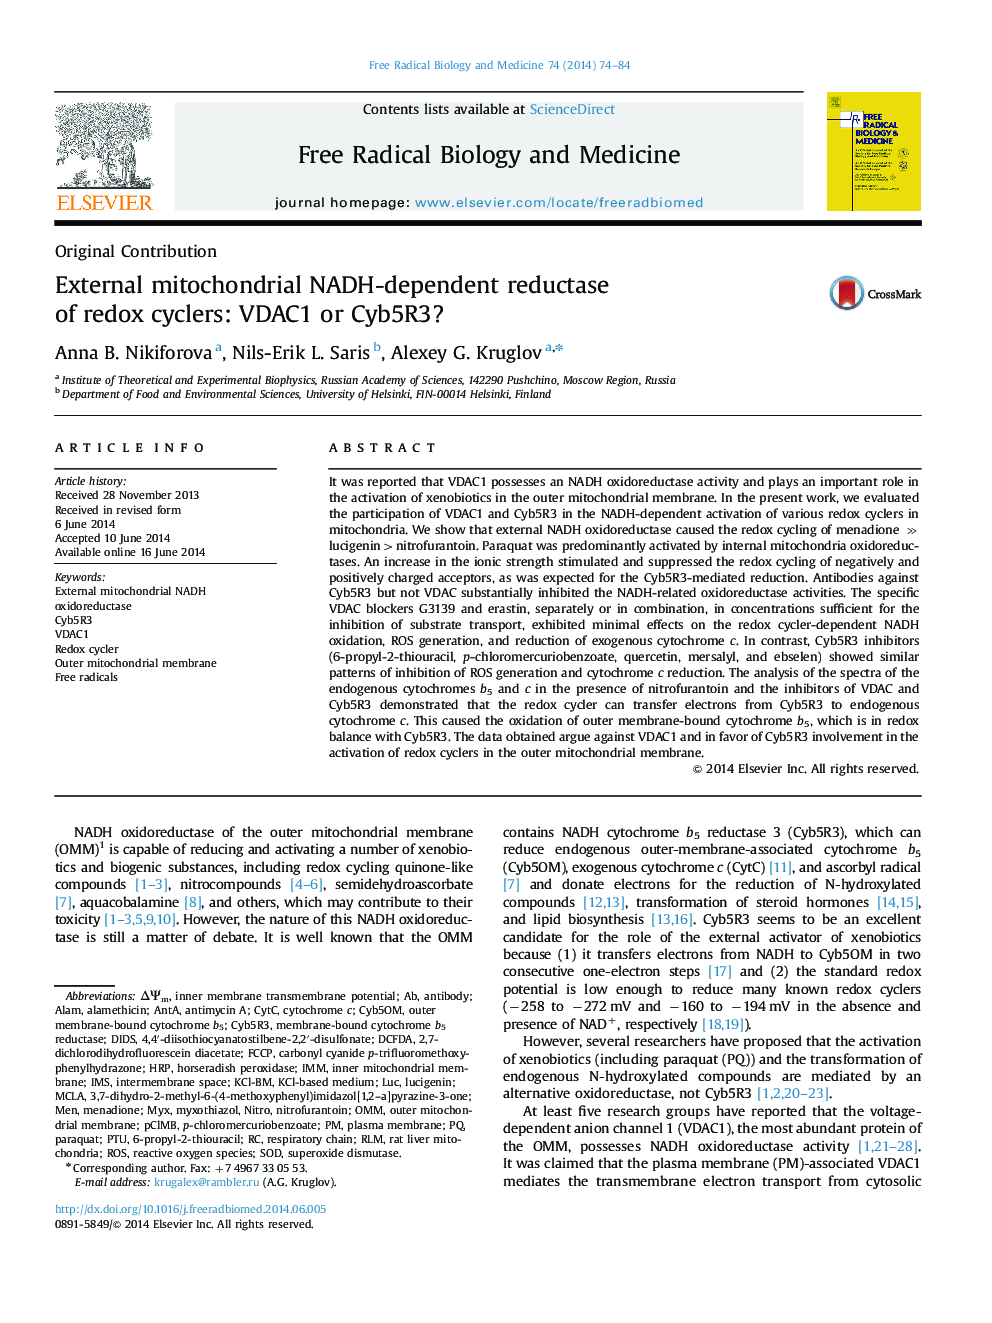 External mitochondrial NADH-dependent reductase of redox cyclers: VDAC1 or Cyb5R3?